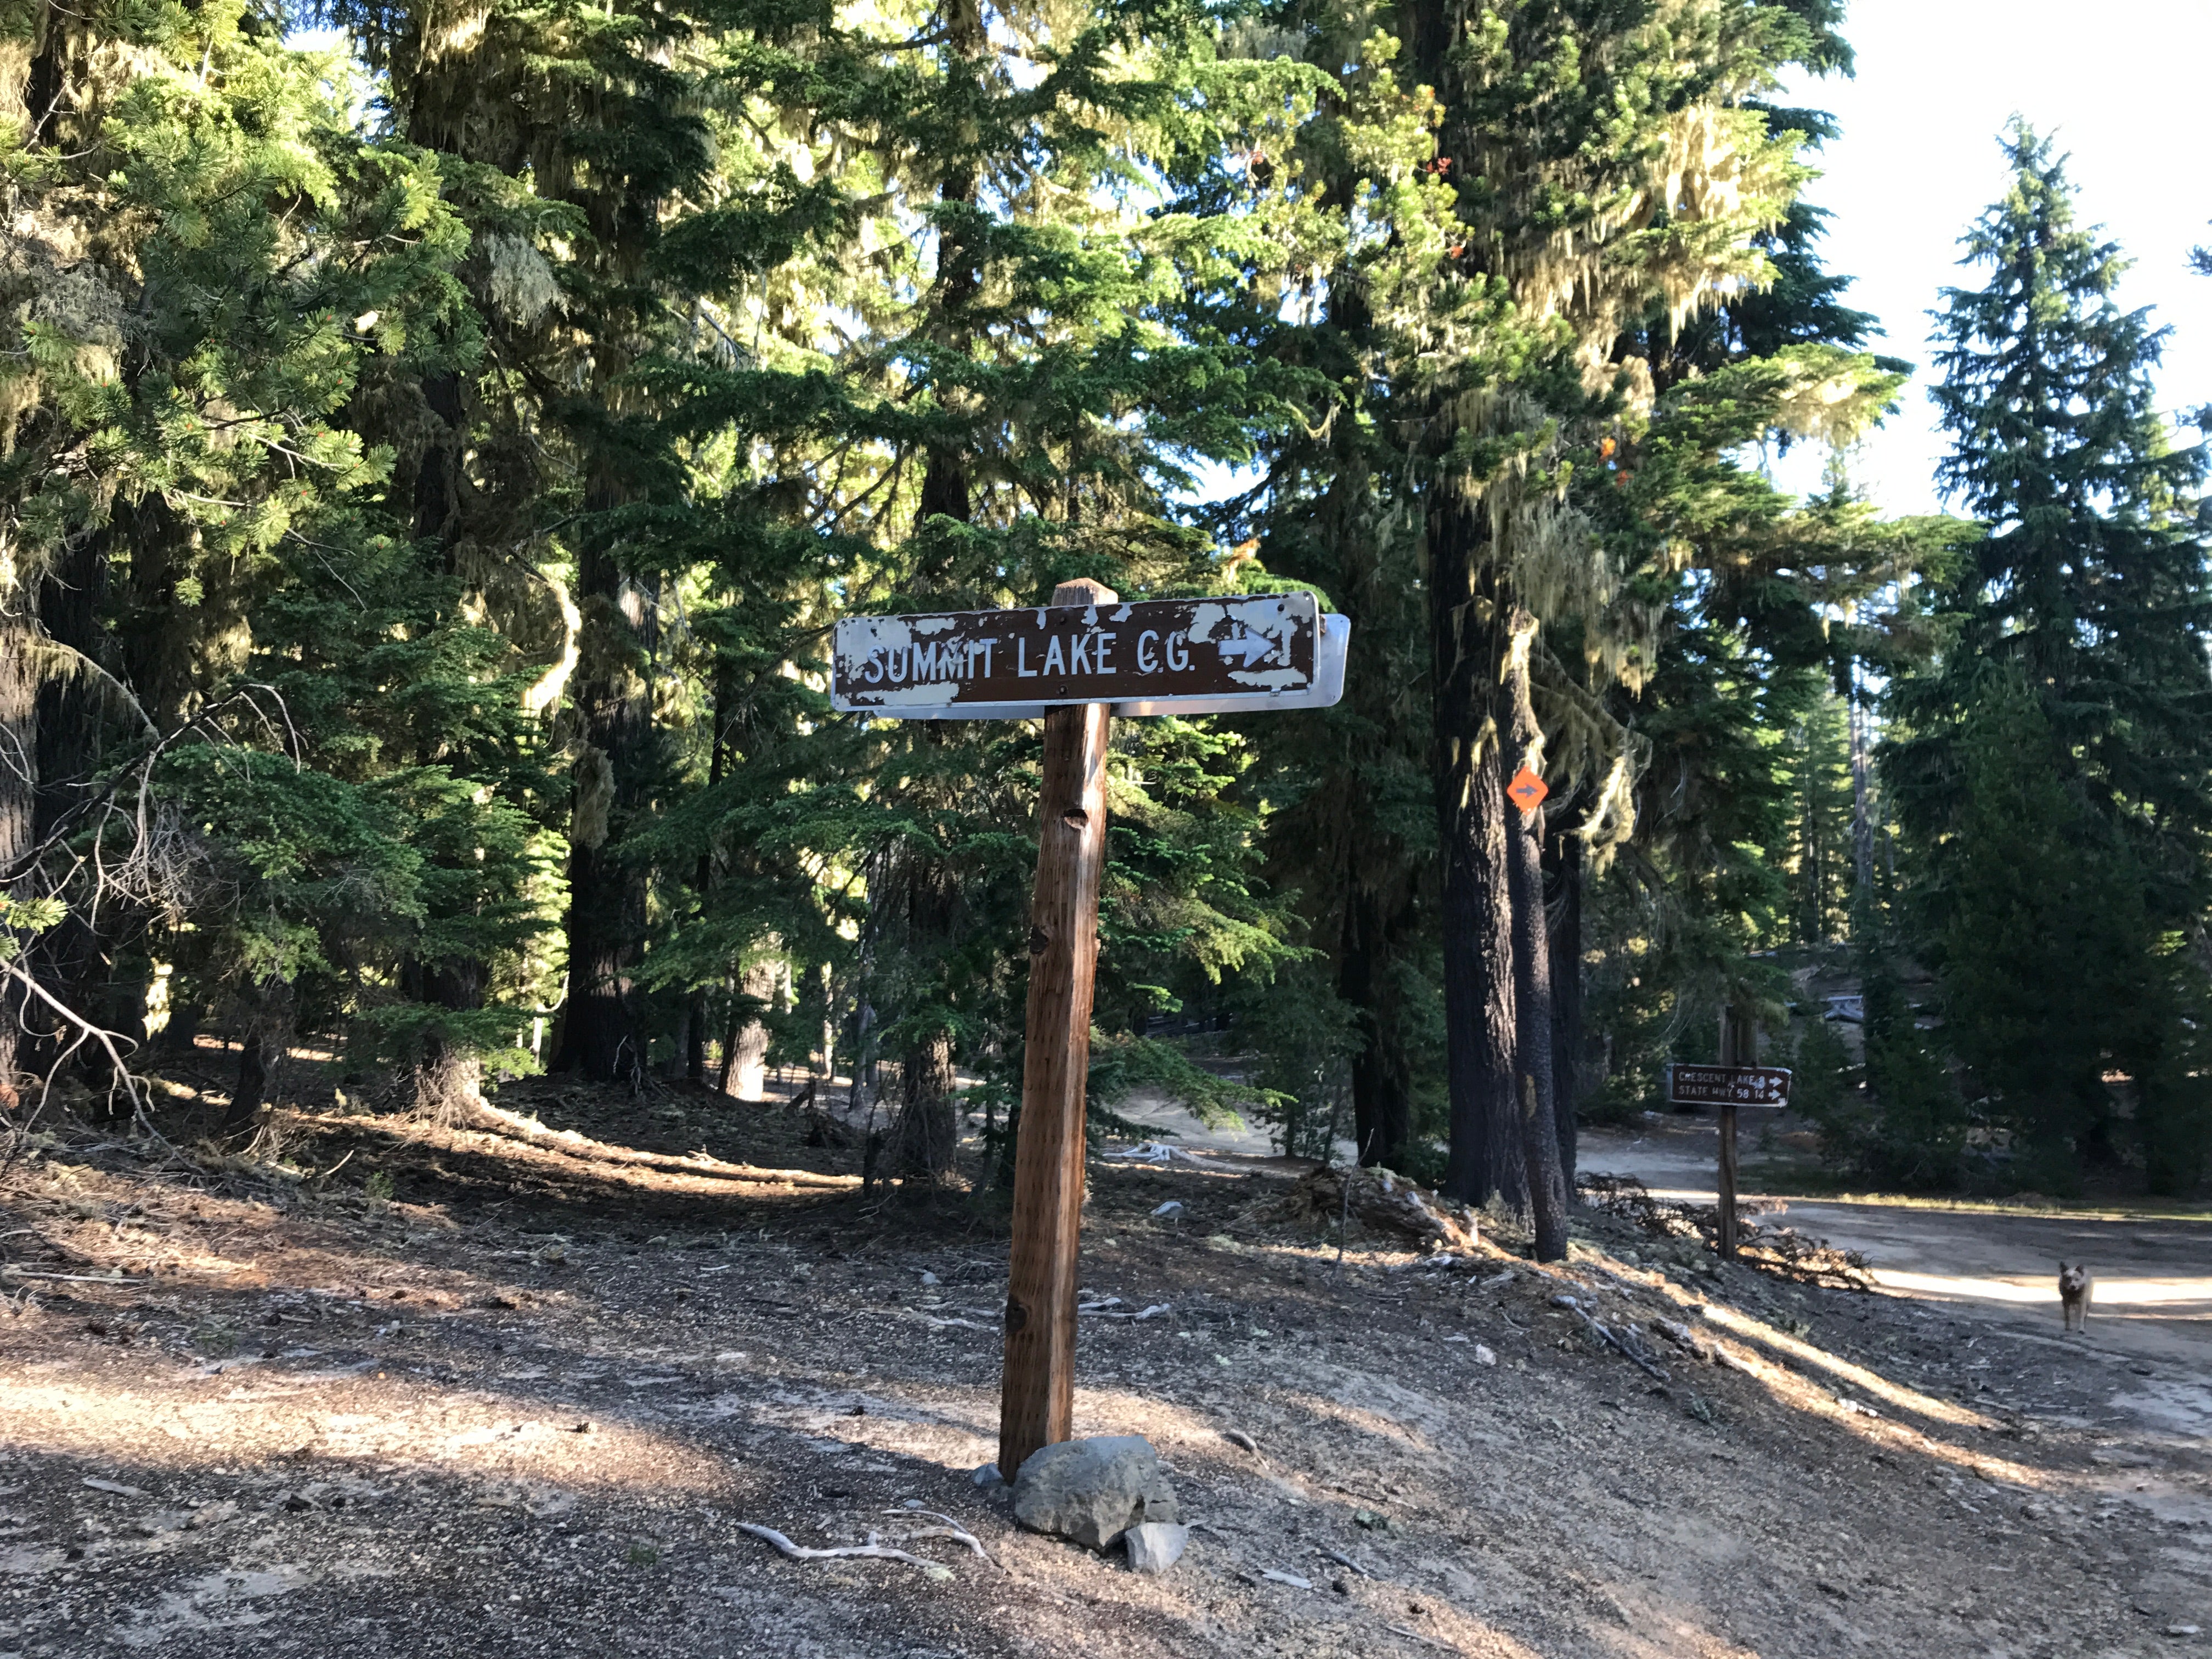 The little sign from the road indicating there is a campground close.  If you blink you can miss it.